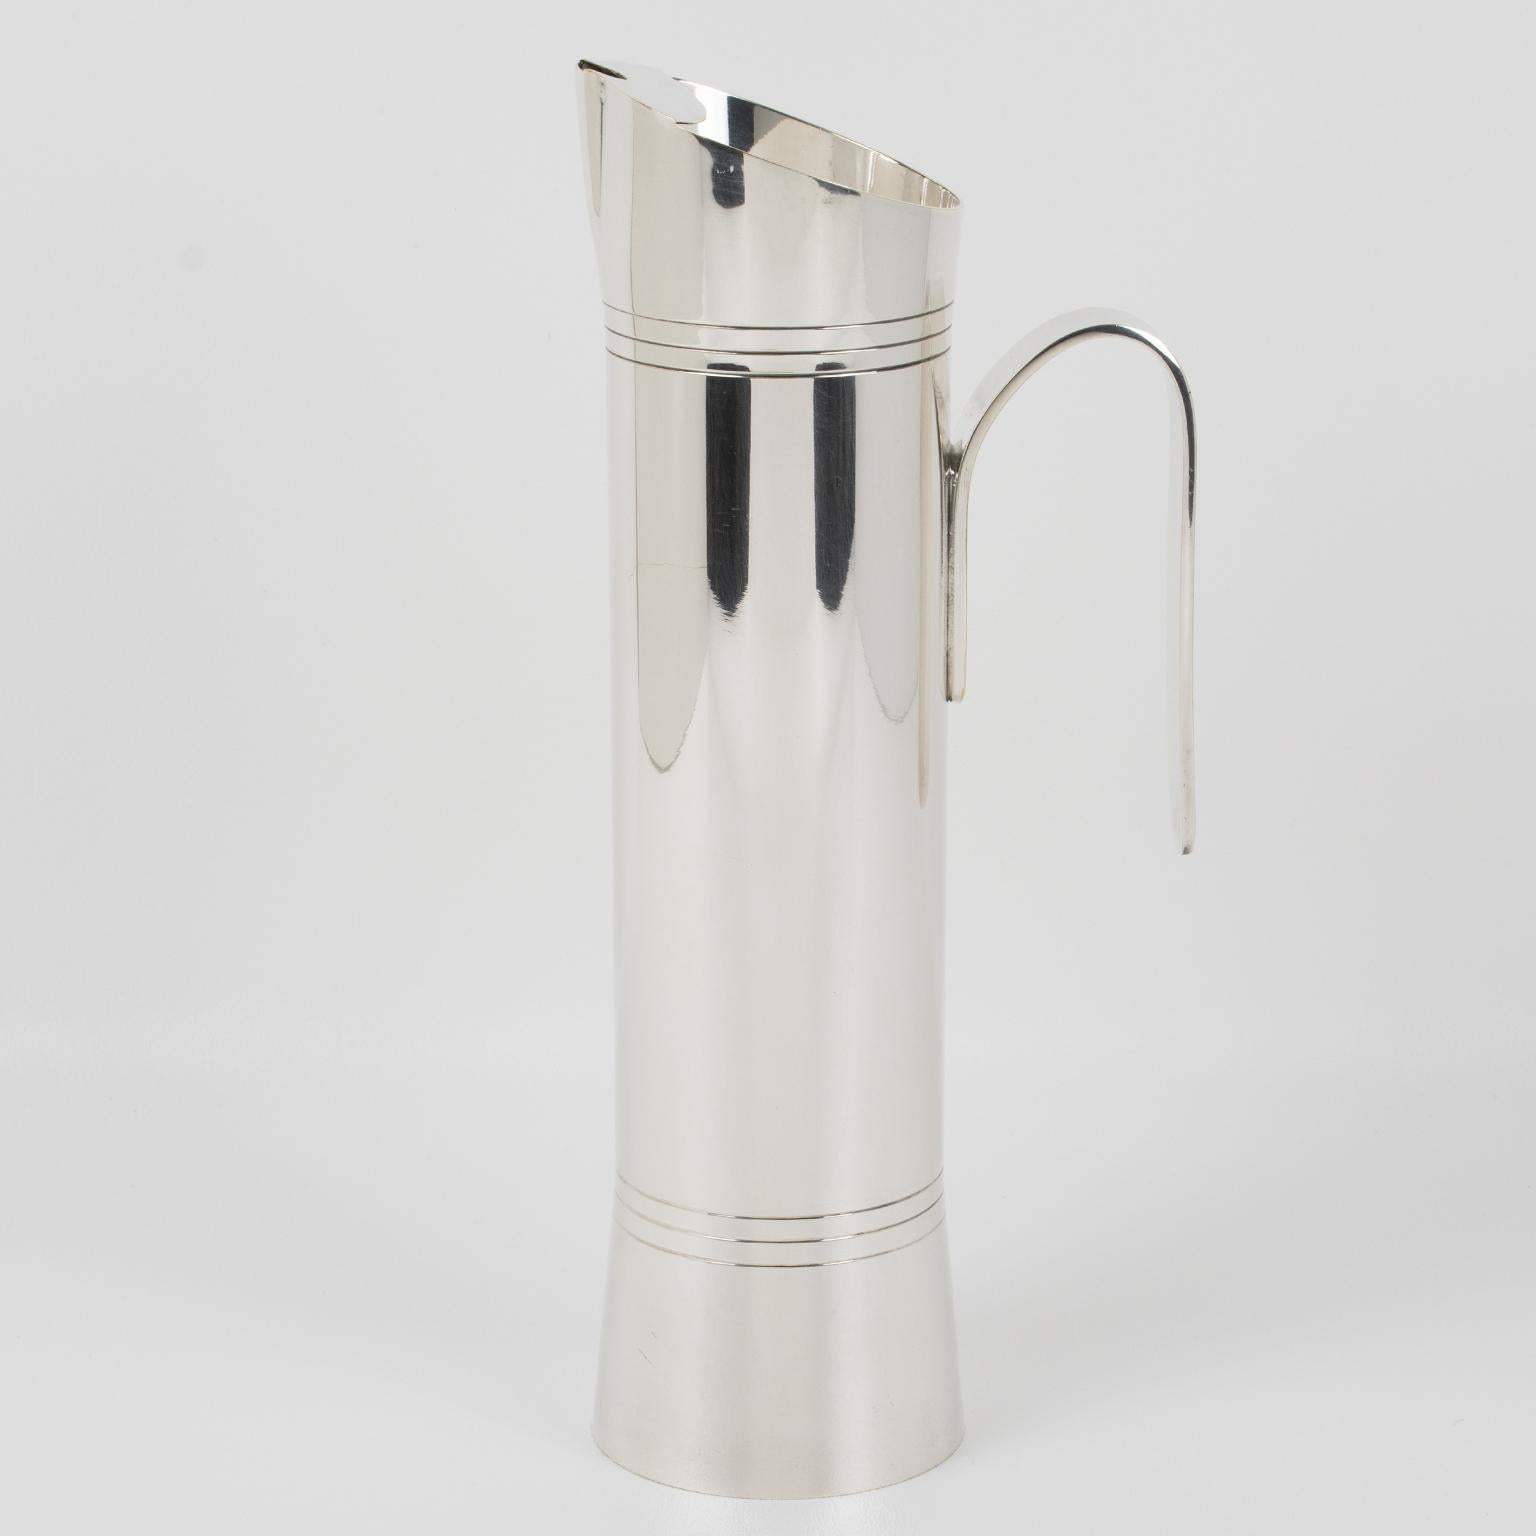 Italian silver master Giuliano Bossi designed this streamlined and minimalist barware accessory for Ibis, Milano in the 1980s. The sleek and modernist design boasts an extra-tall silver plate Martini pitcher or mixer jug with Art Deco-inspired